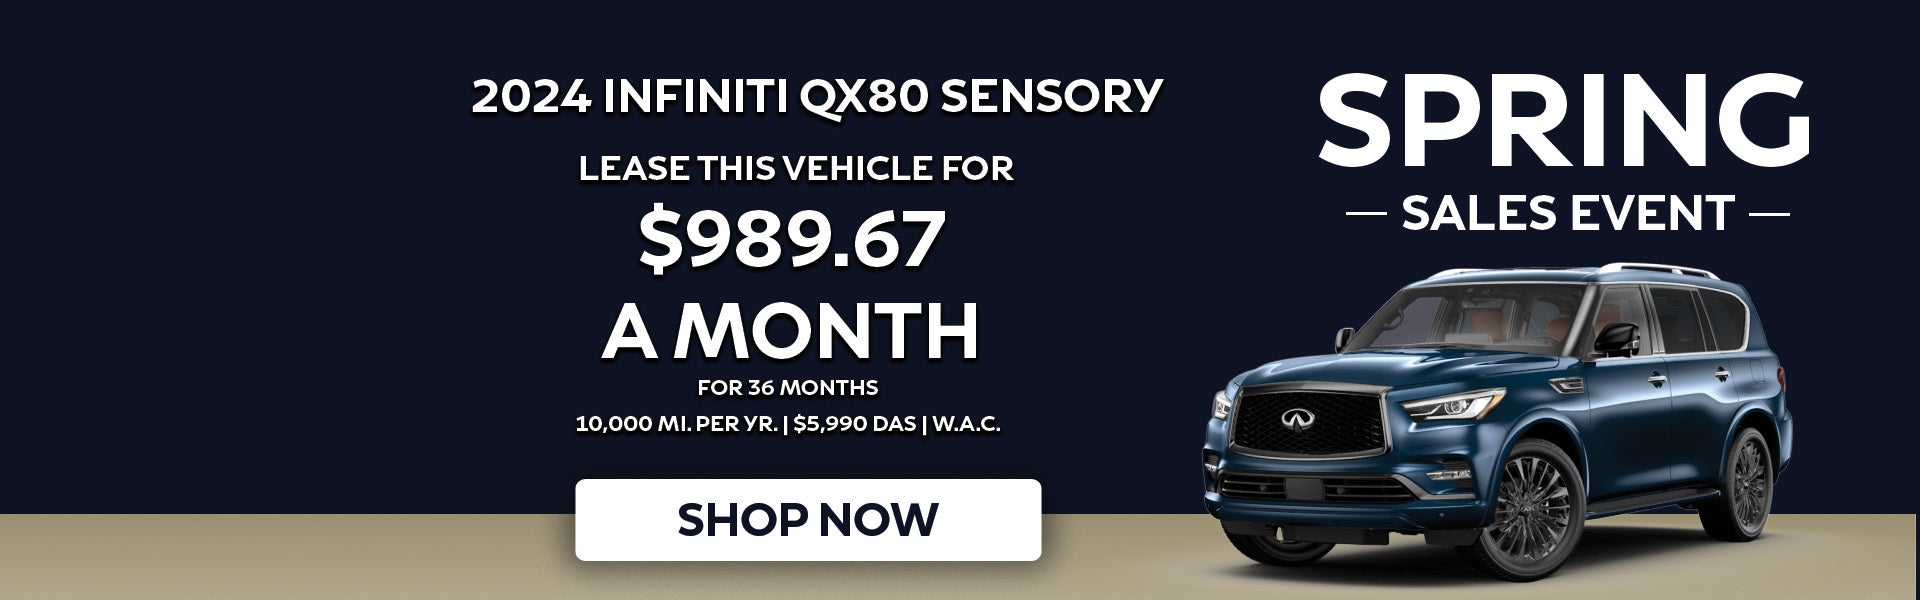 2024 INFINITI QX80 Sensory Lease Special Offer